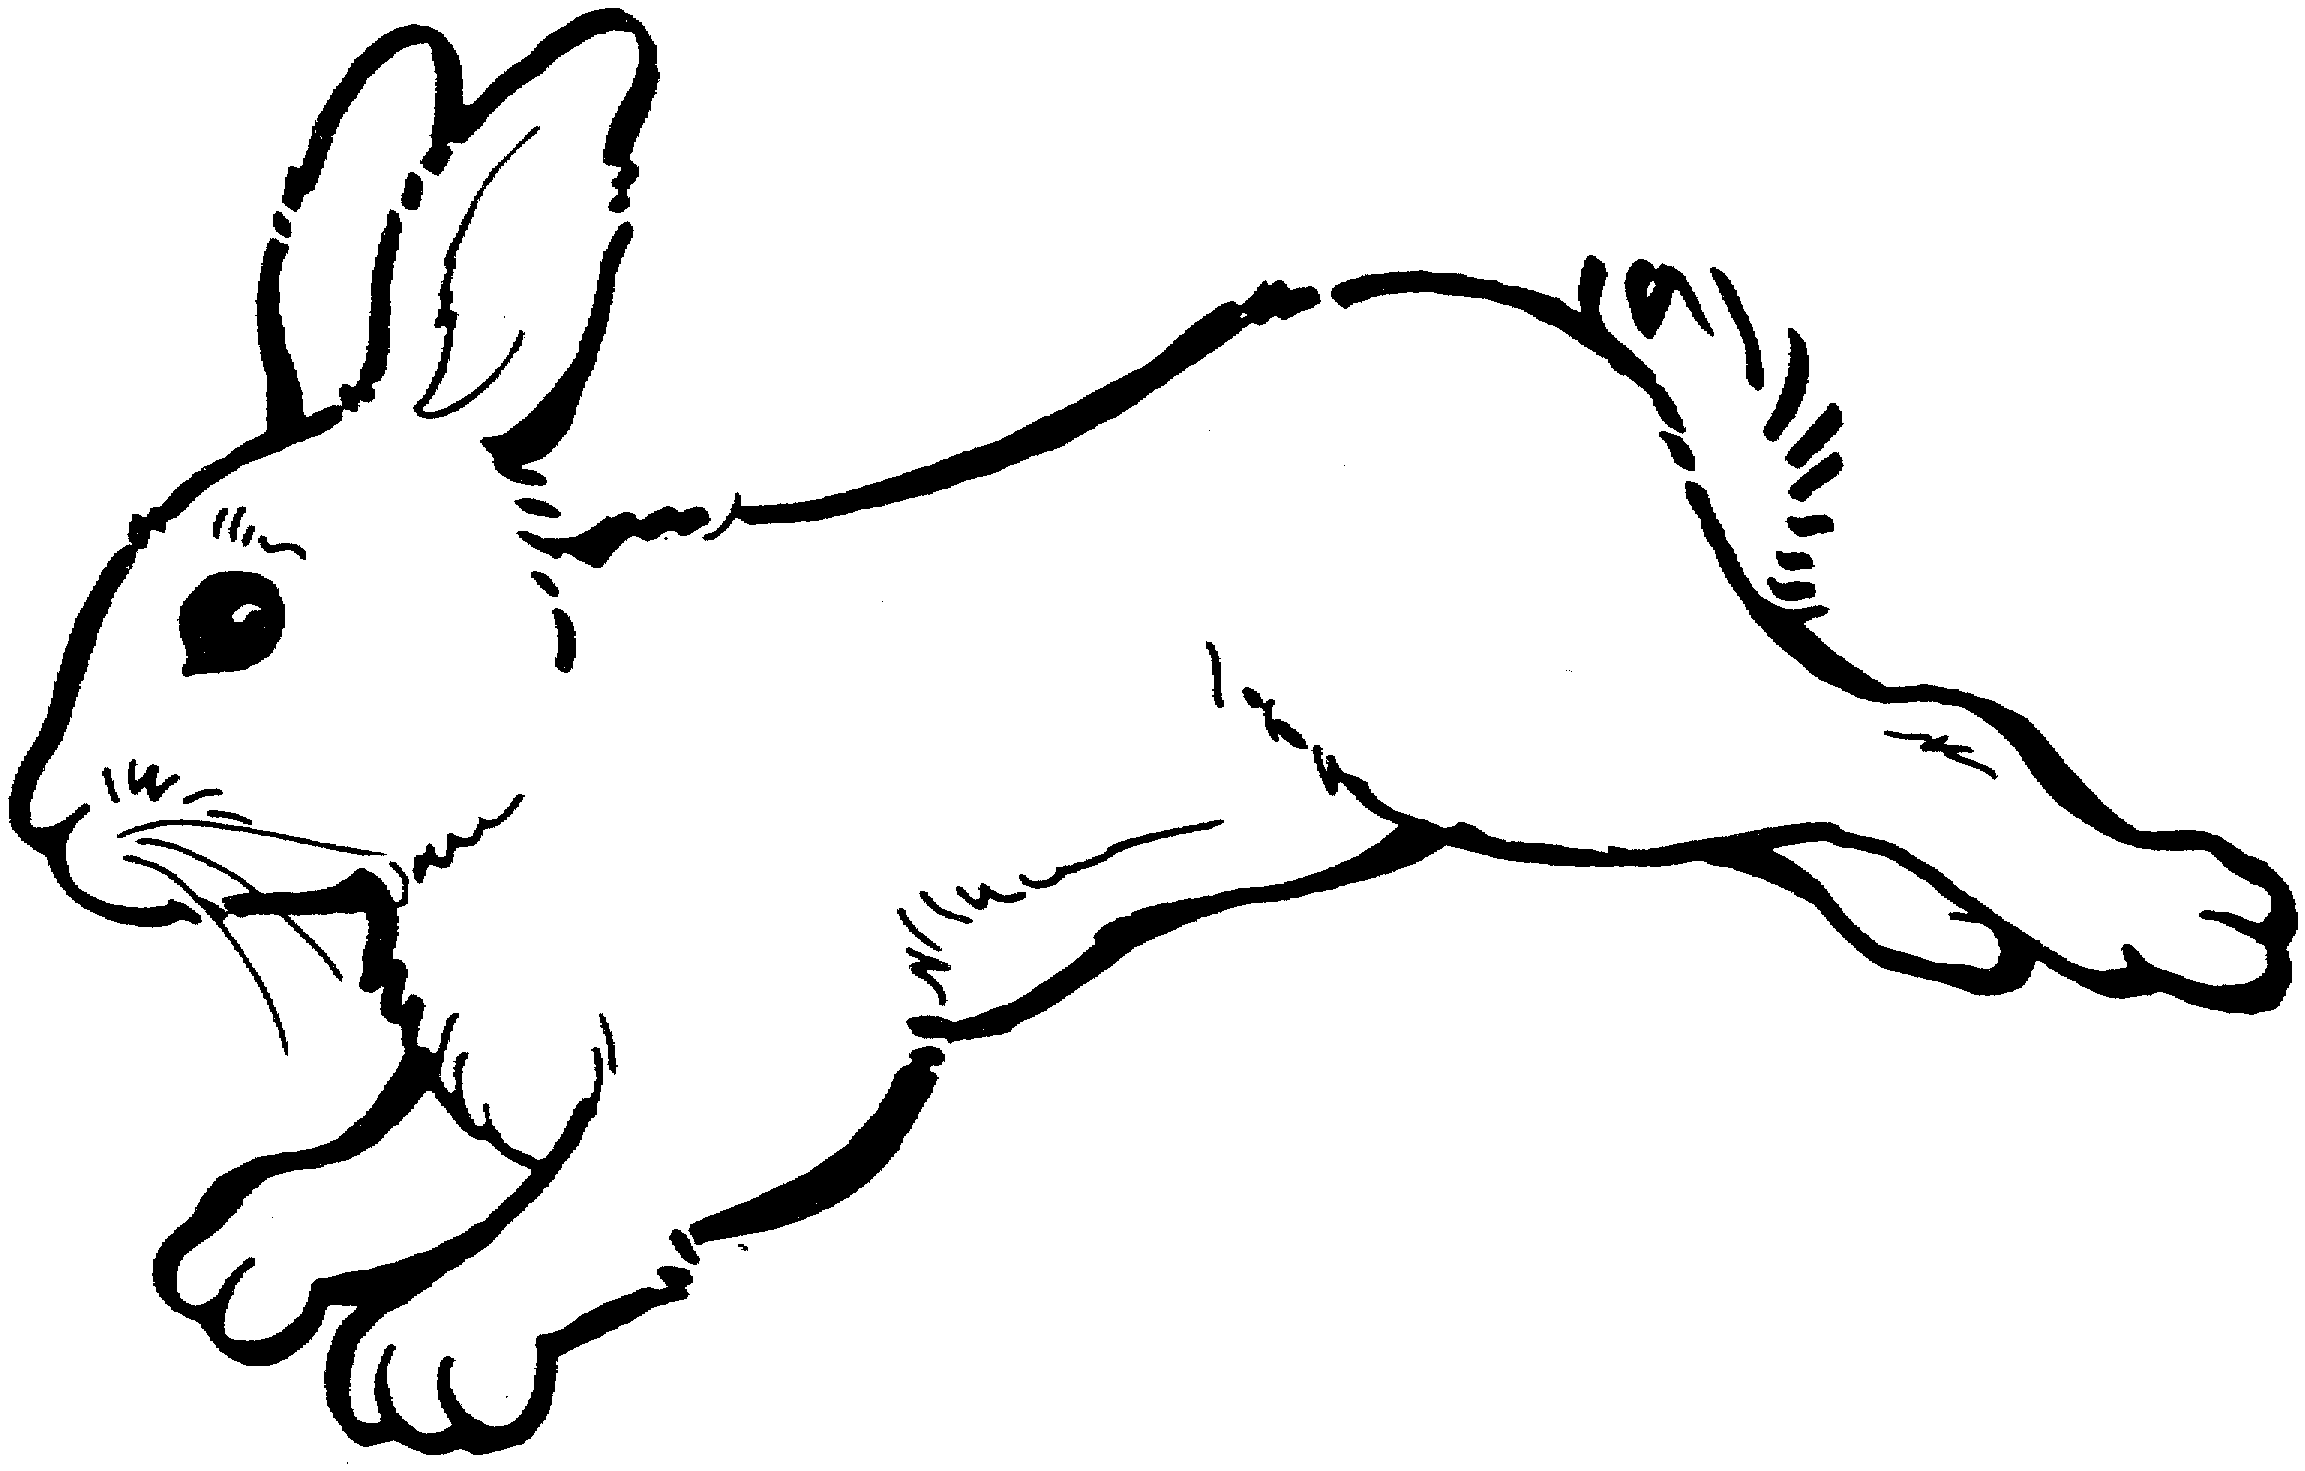 Bunny clipart black and white free clipart images 3